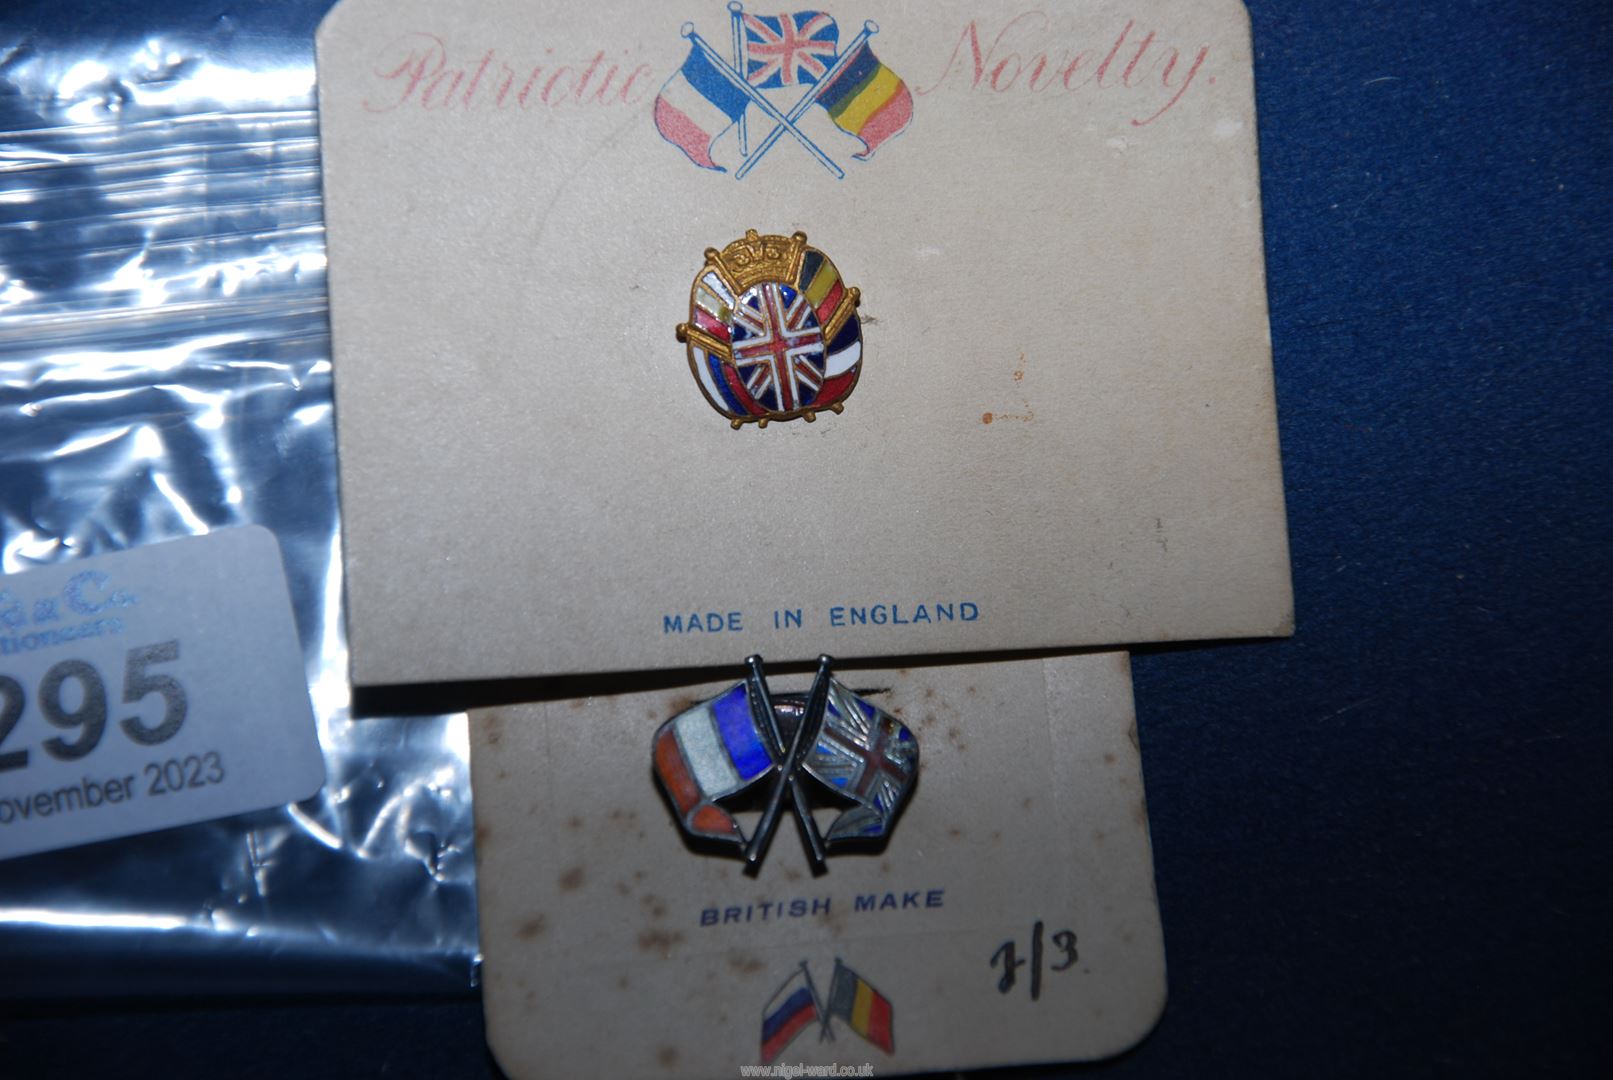 Two rare sterling silver WWI Allied Nations "Patriotic" lapel "Flag pins" with original sales cards. - Image 2 of 2